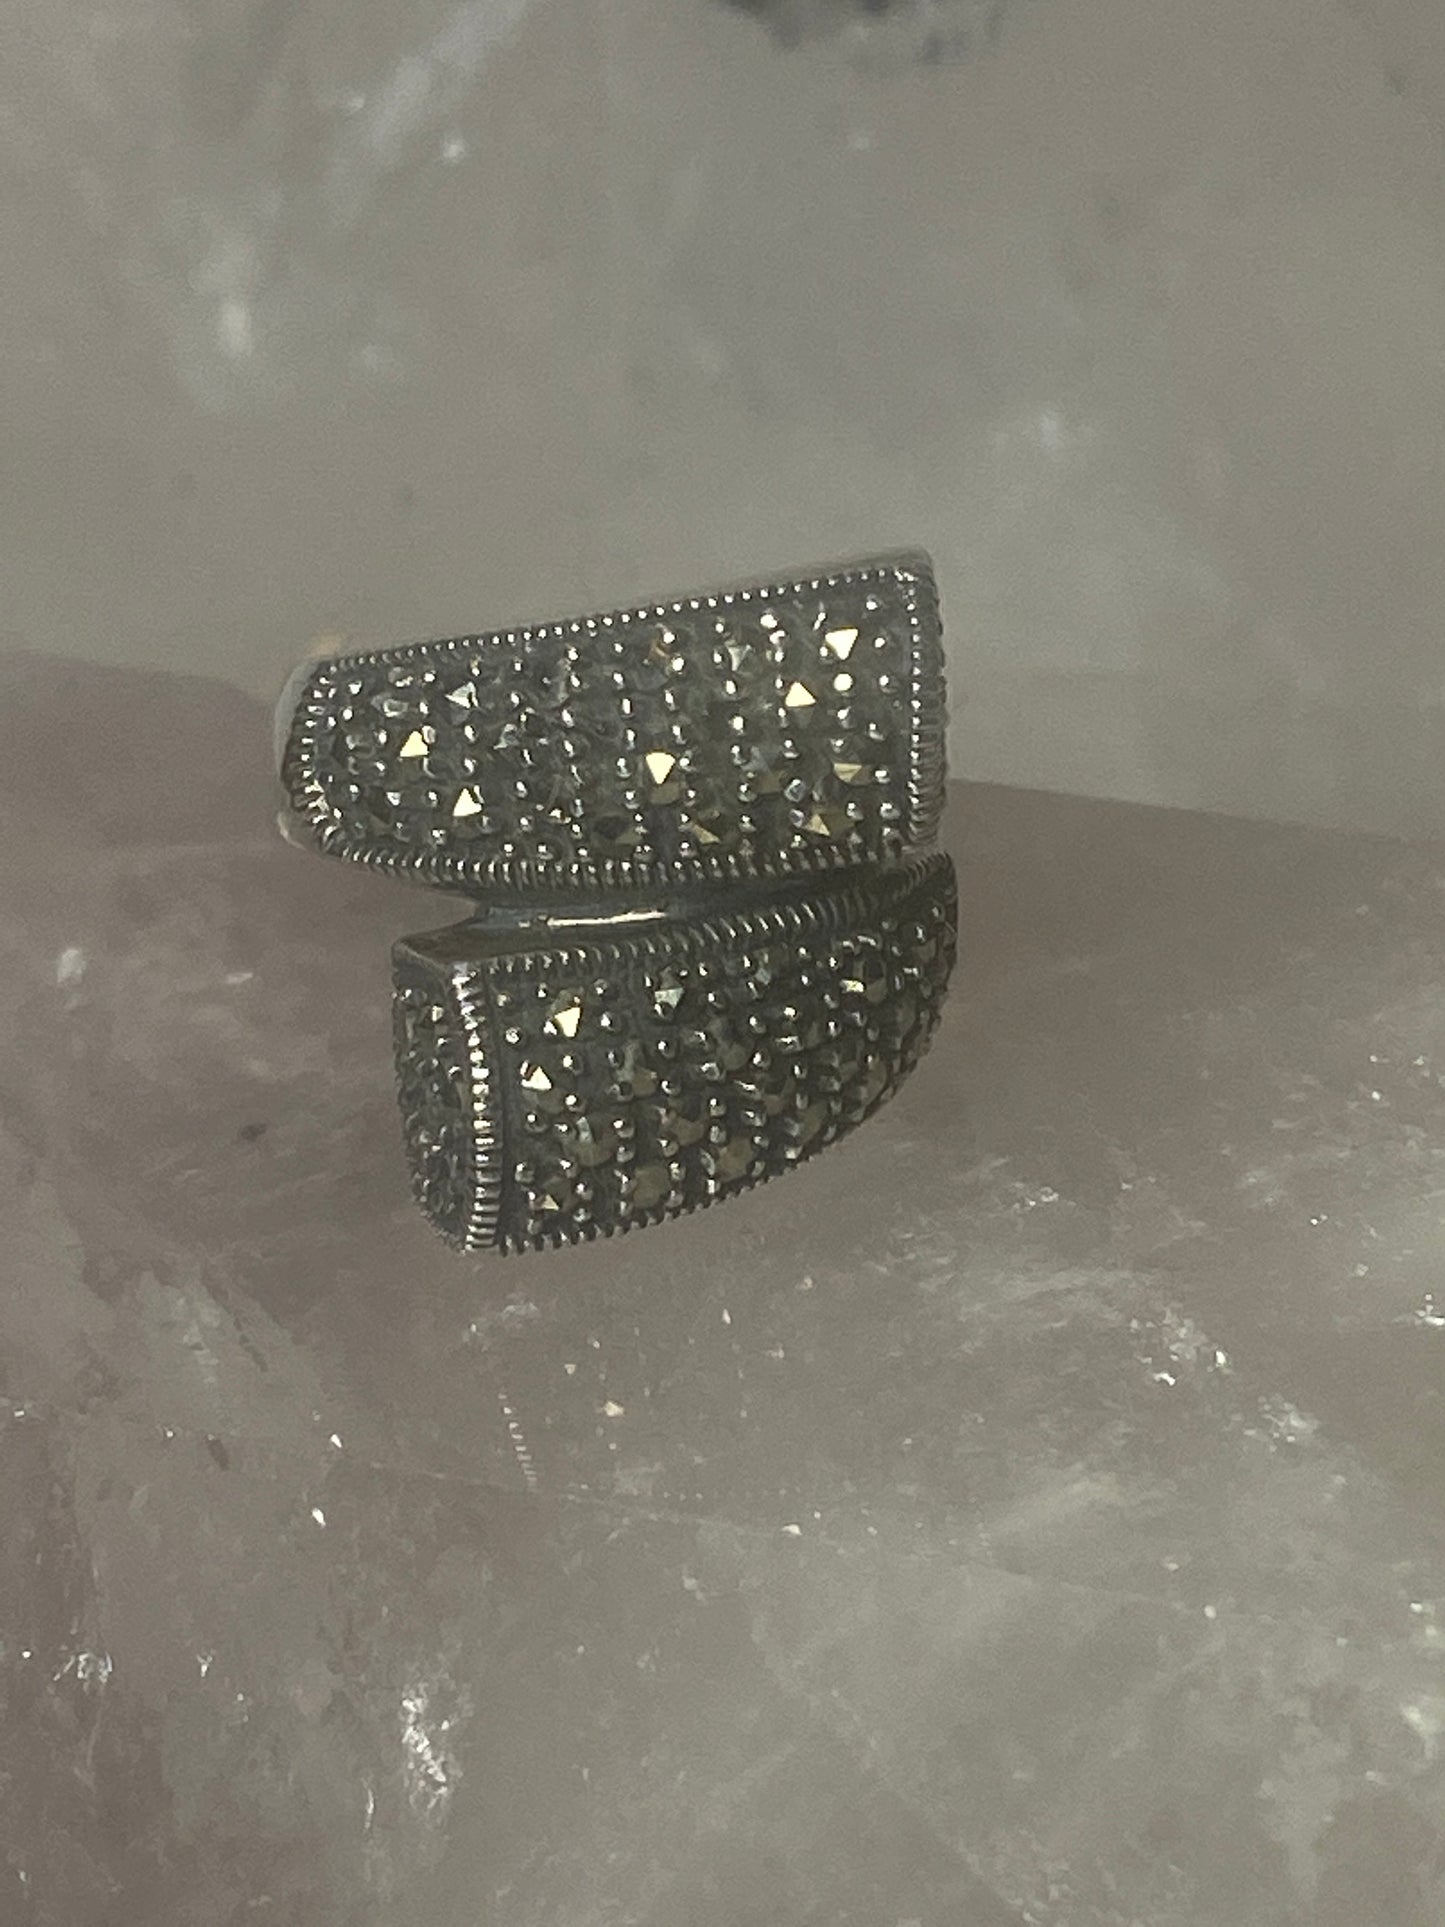 Marcasite ring wrap around  band sterling silver Art Deco style women girls